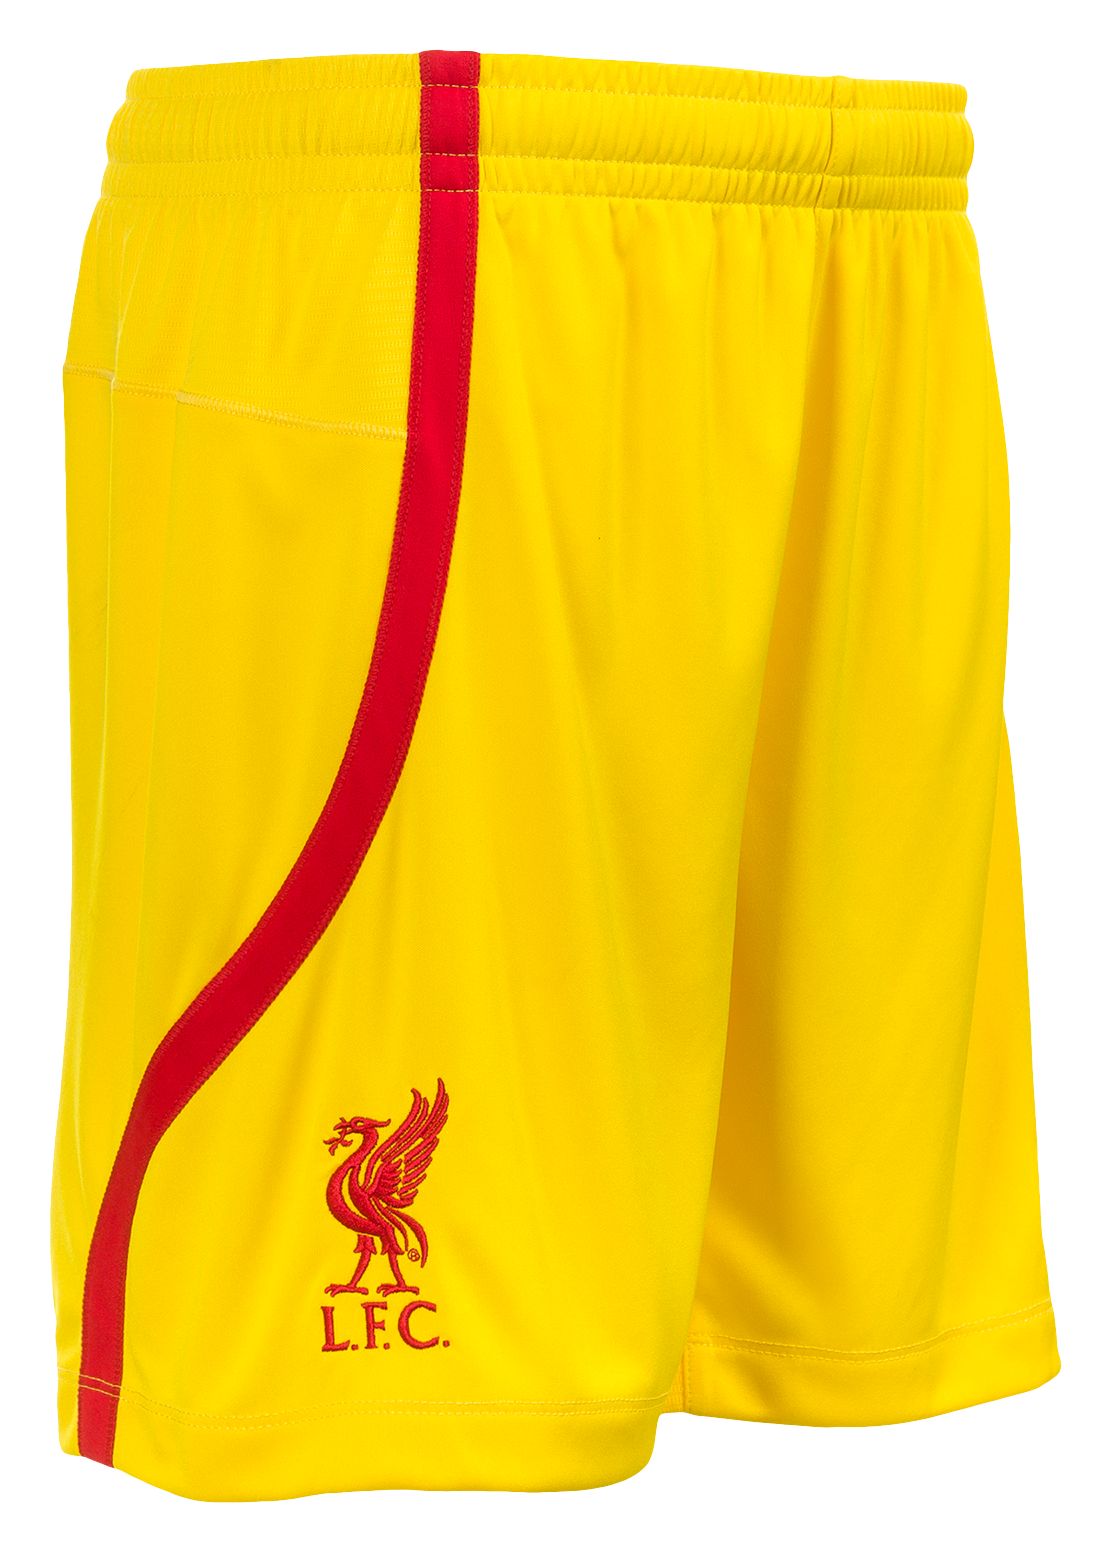 LFC Away Junior Short, Cyber Yellow with High Risk Red image number 0